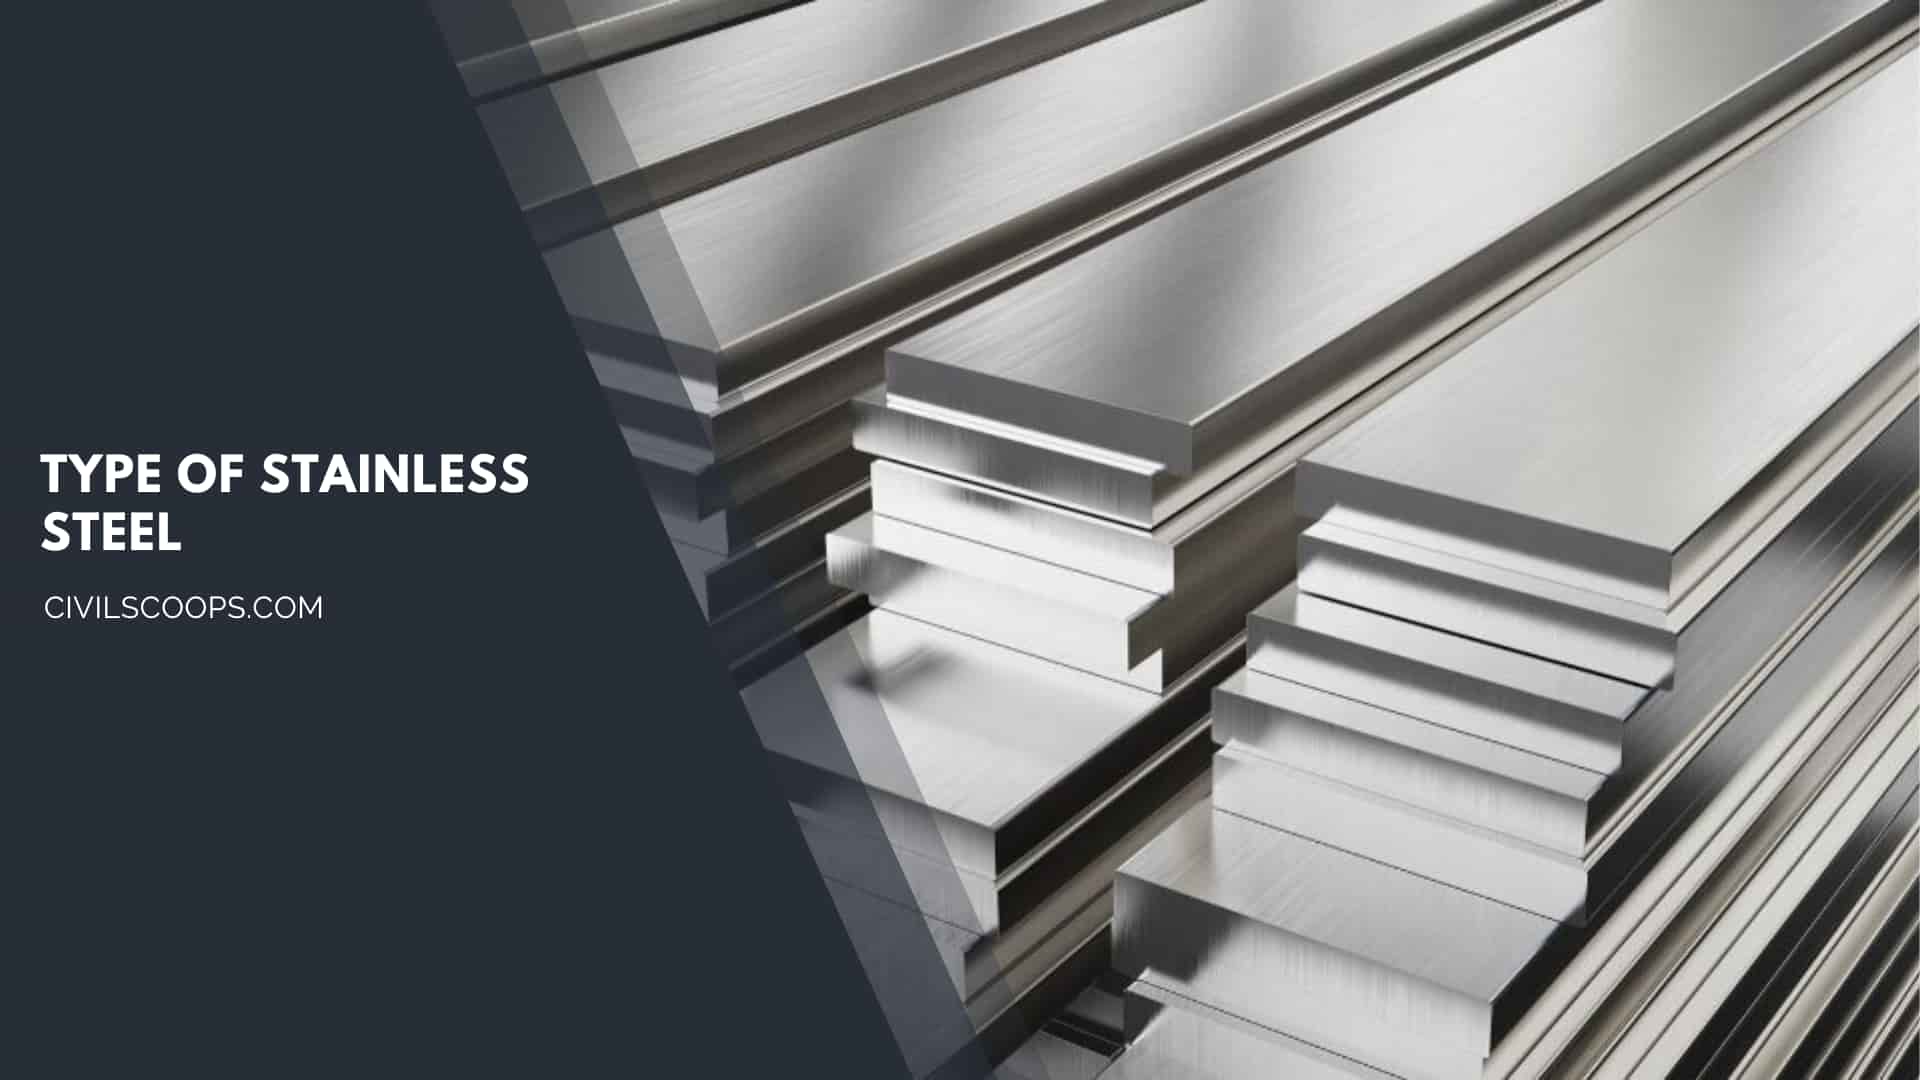 Type of Stainless Steel